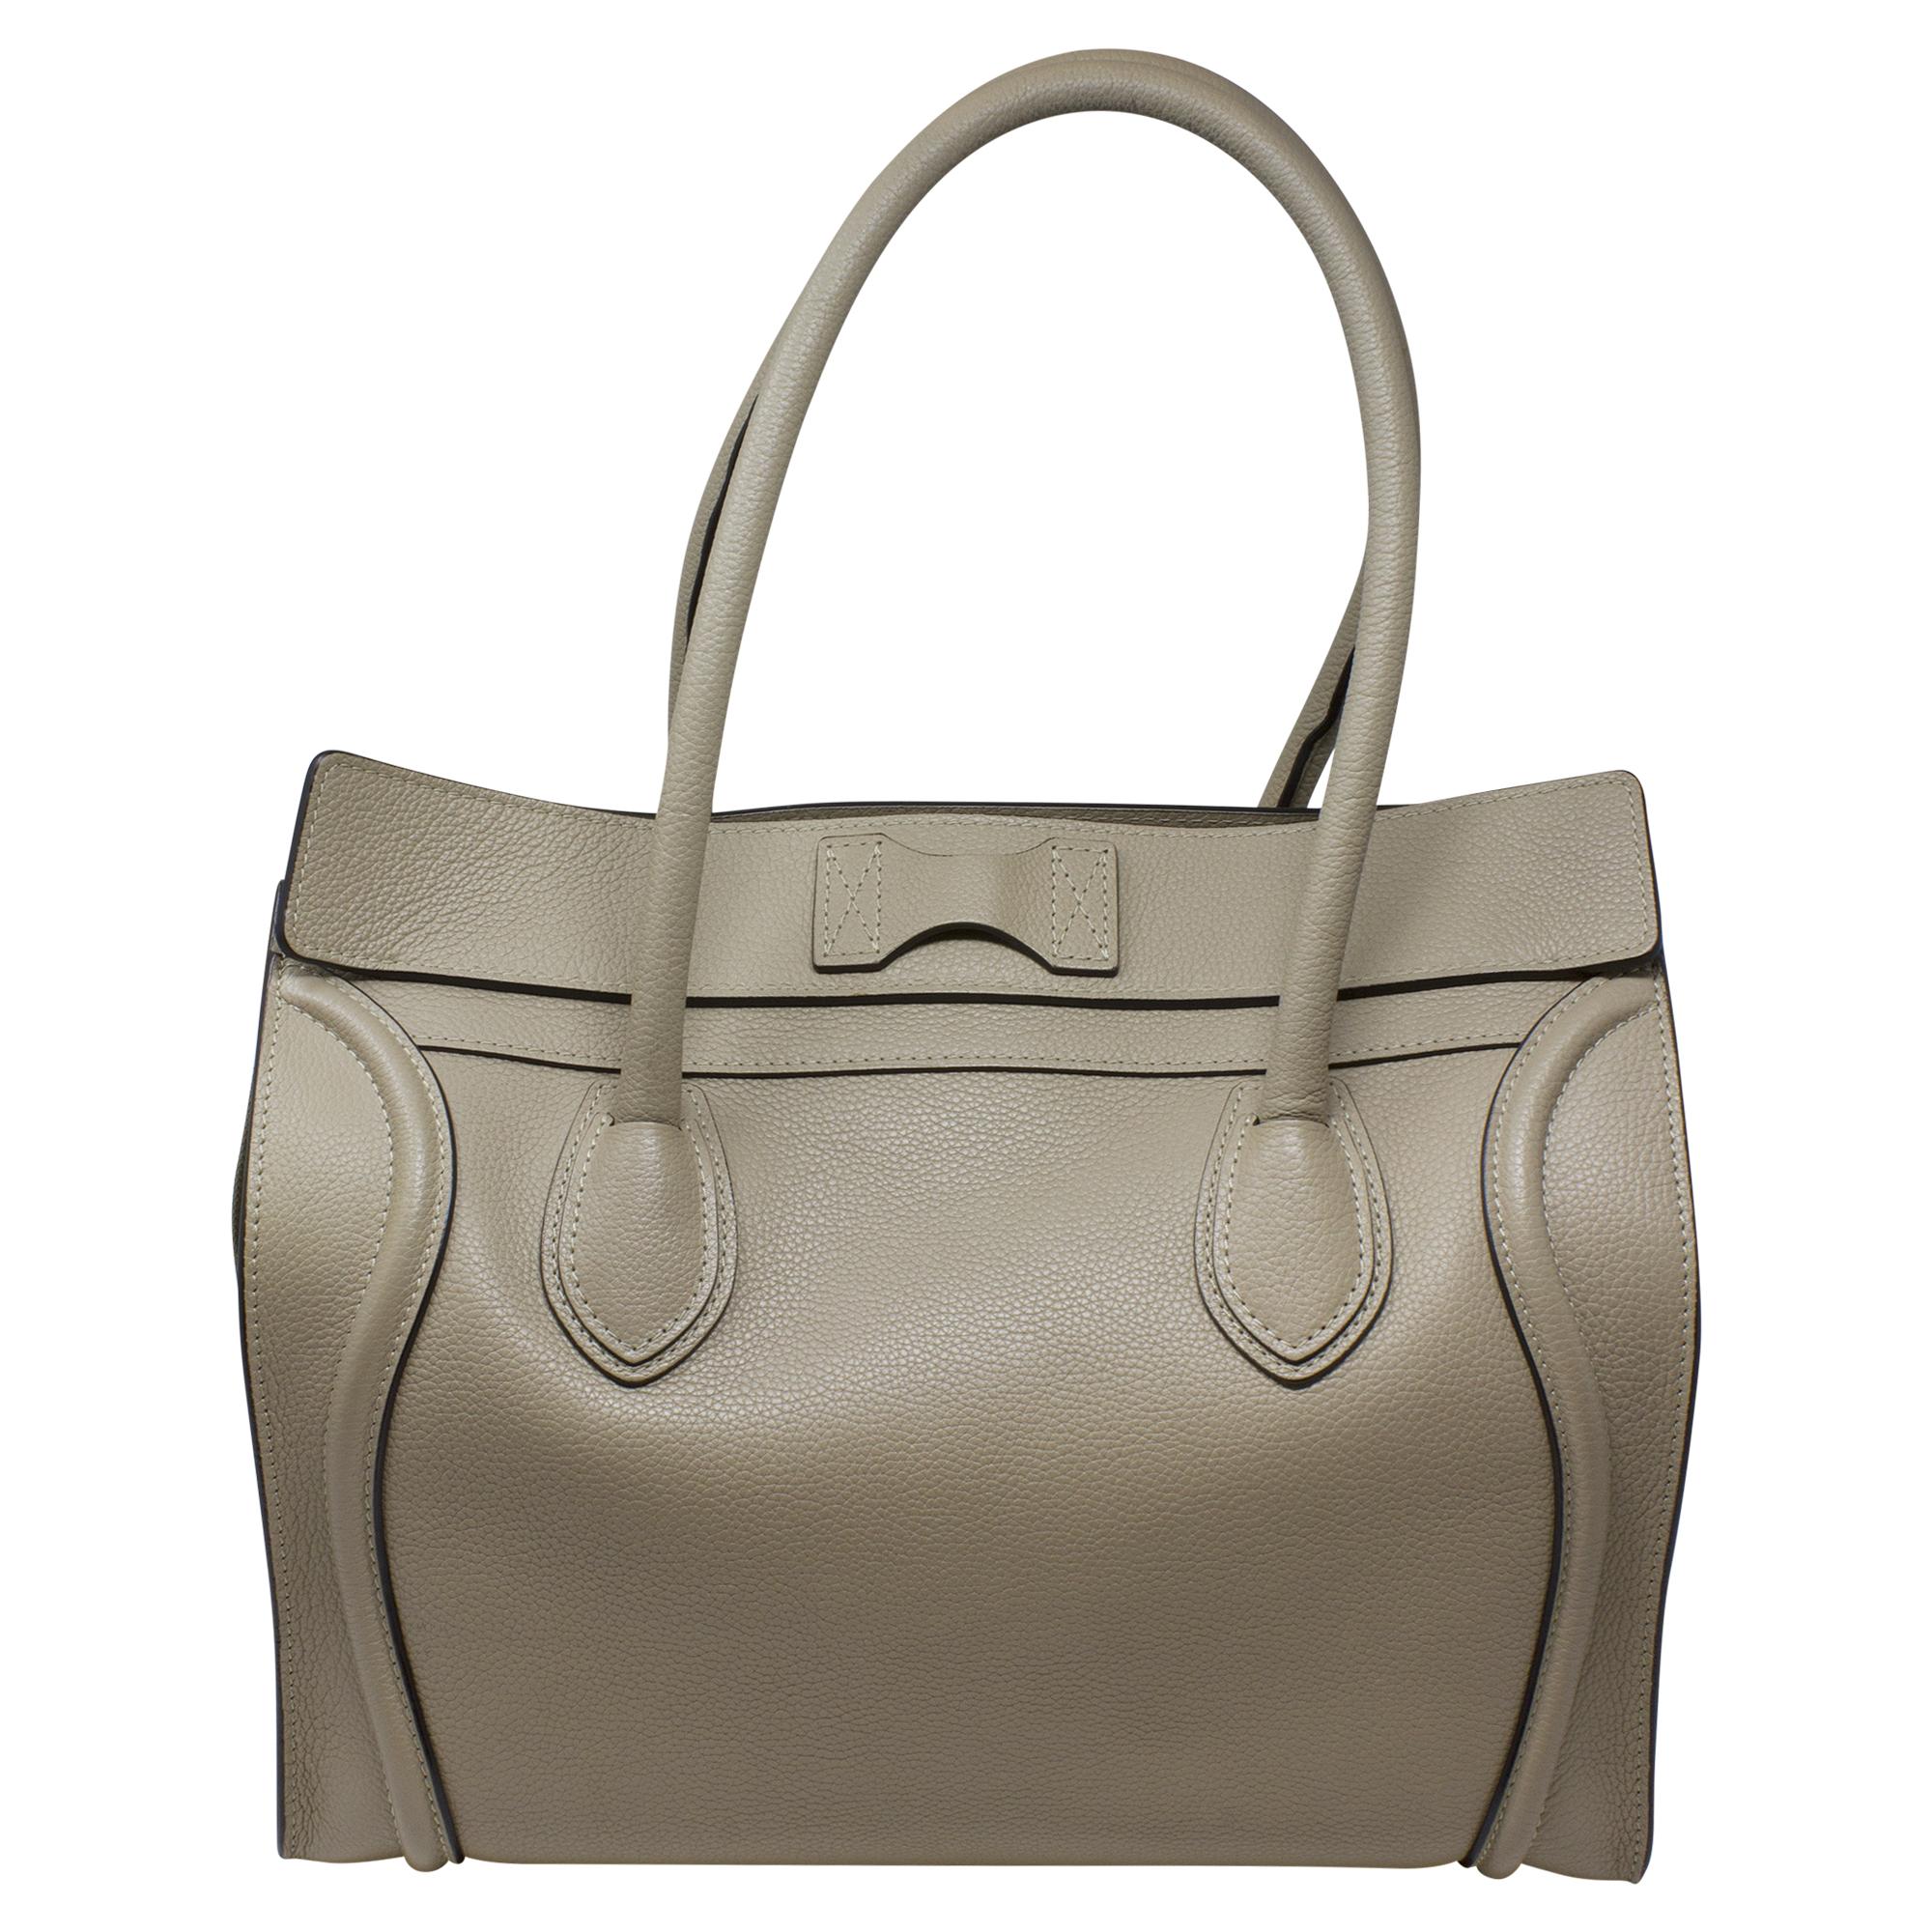 Celine Dune Grained Leather Tote In Excellent Condition For Sale In Atlanta, GA